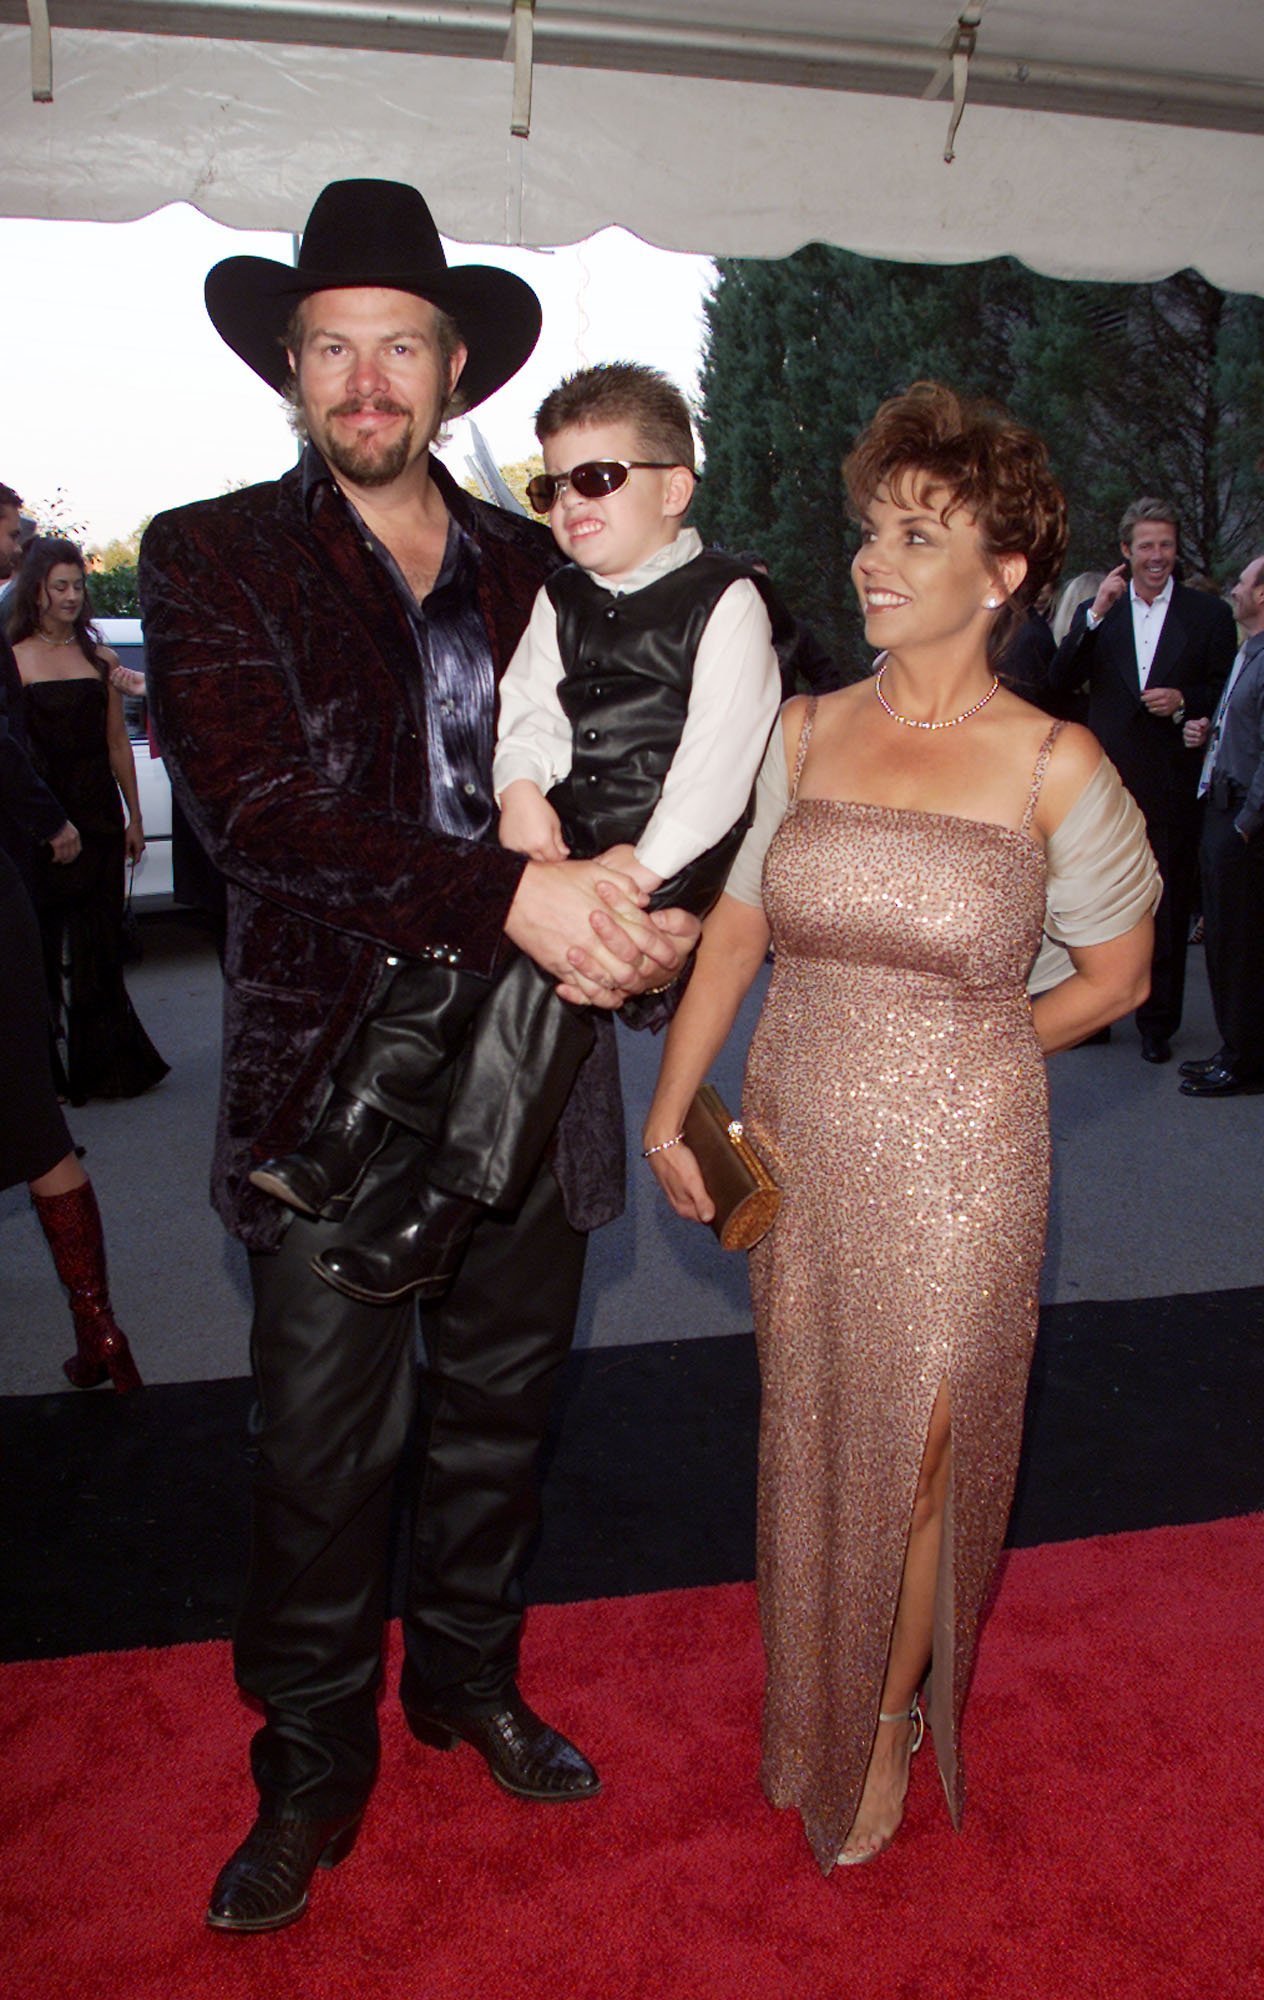 Singer Toby Keith with wife Tricia Lucus and their son Stelen arrive for the 34th Annual CMA Awards at the Grand Old Opry on October 24, 2000 in Nashville, Tennessee | Source: Getty Images